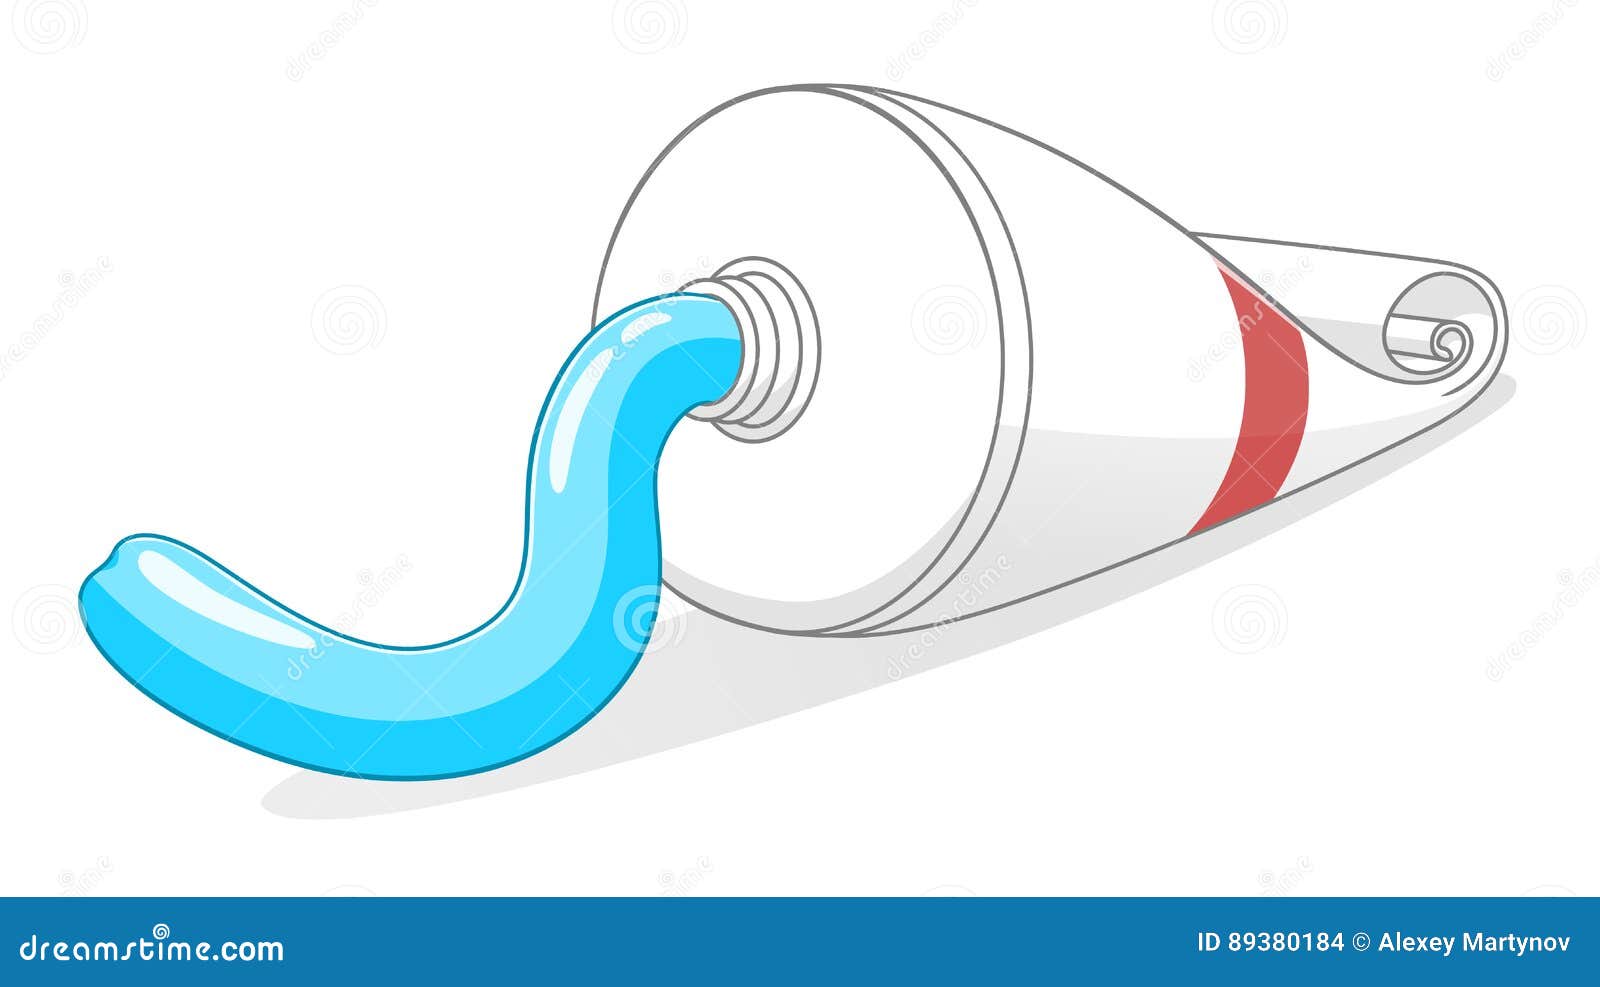 Tube Of Toothpaste Stock Vector Illustration Of Nice 89380184